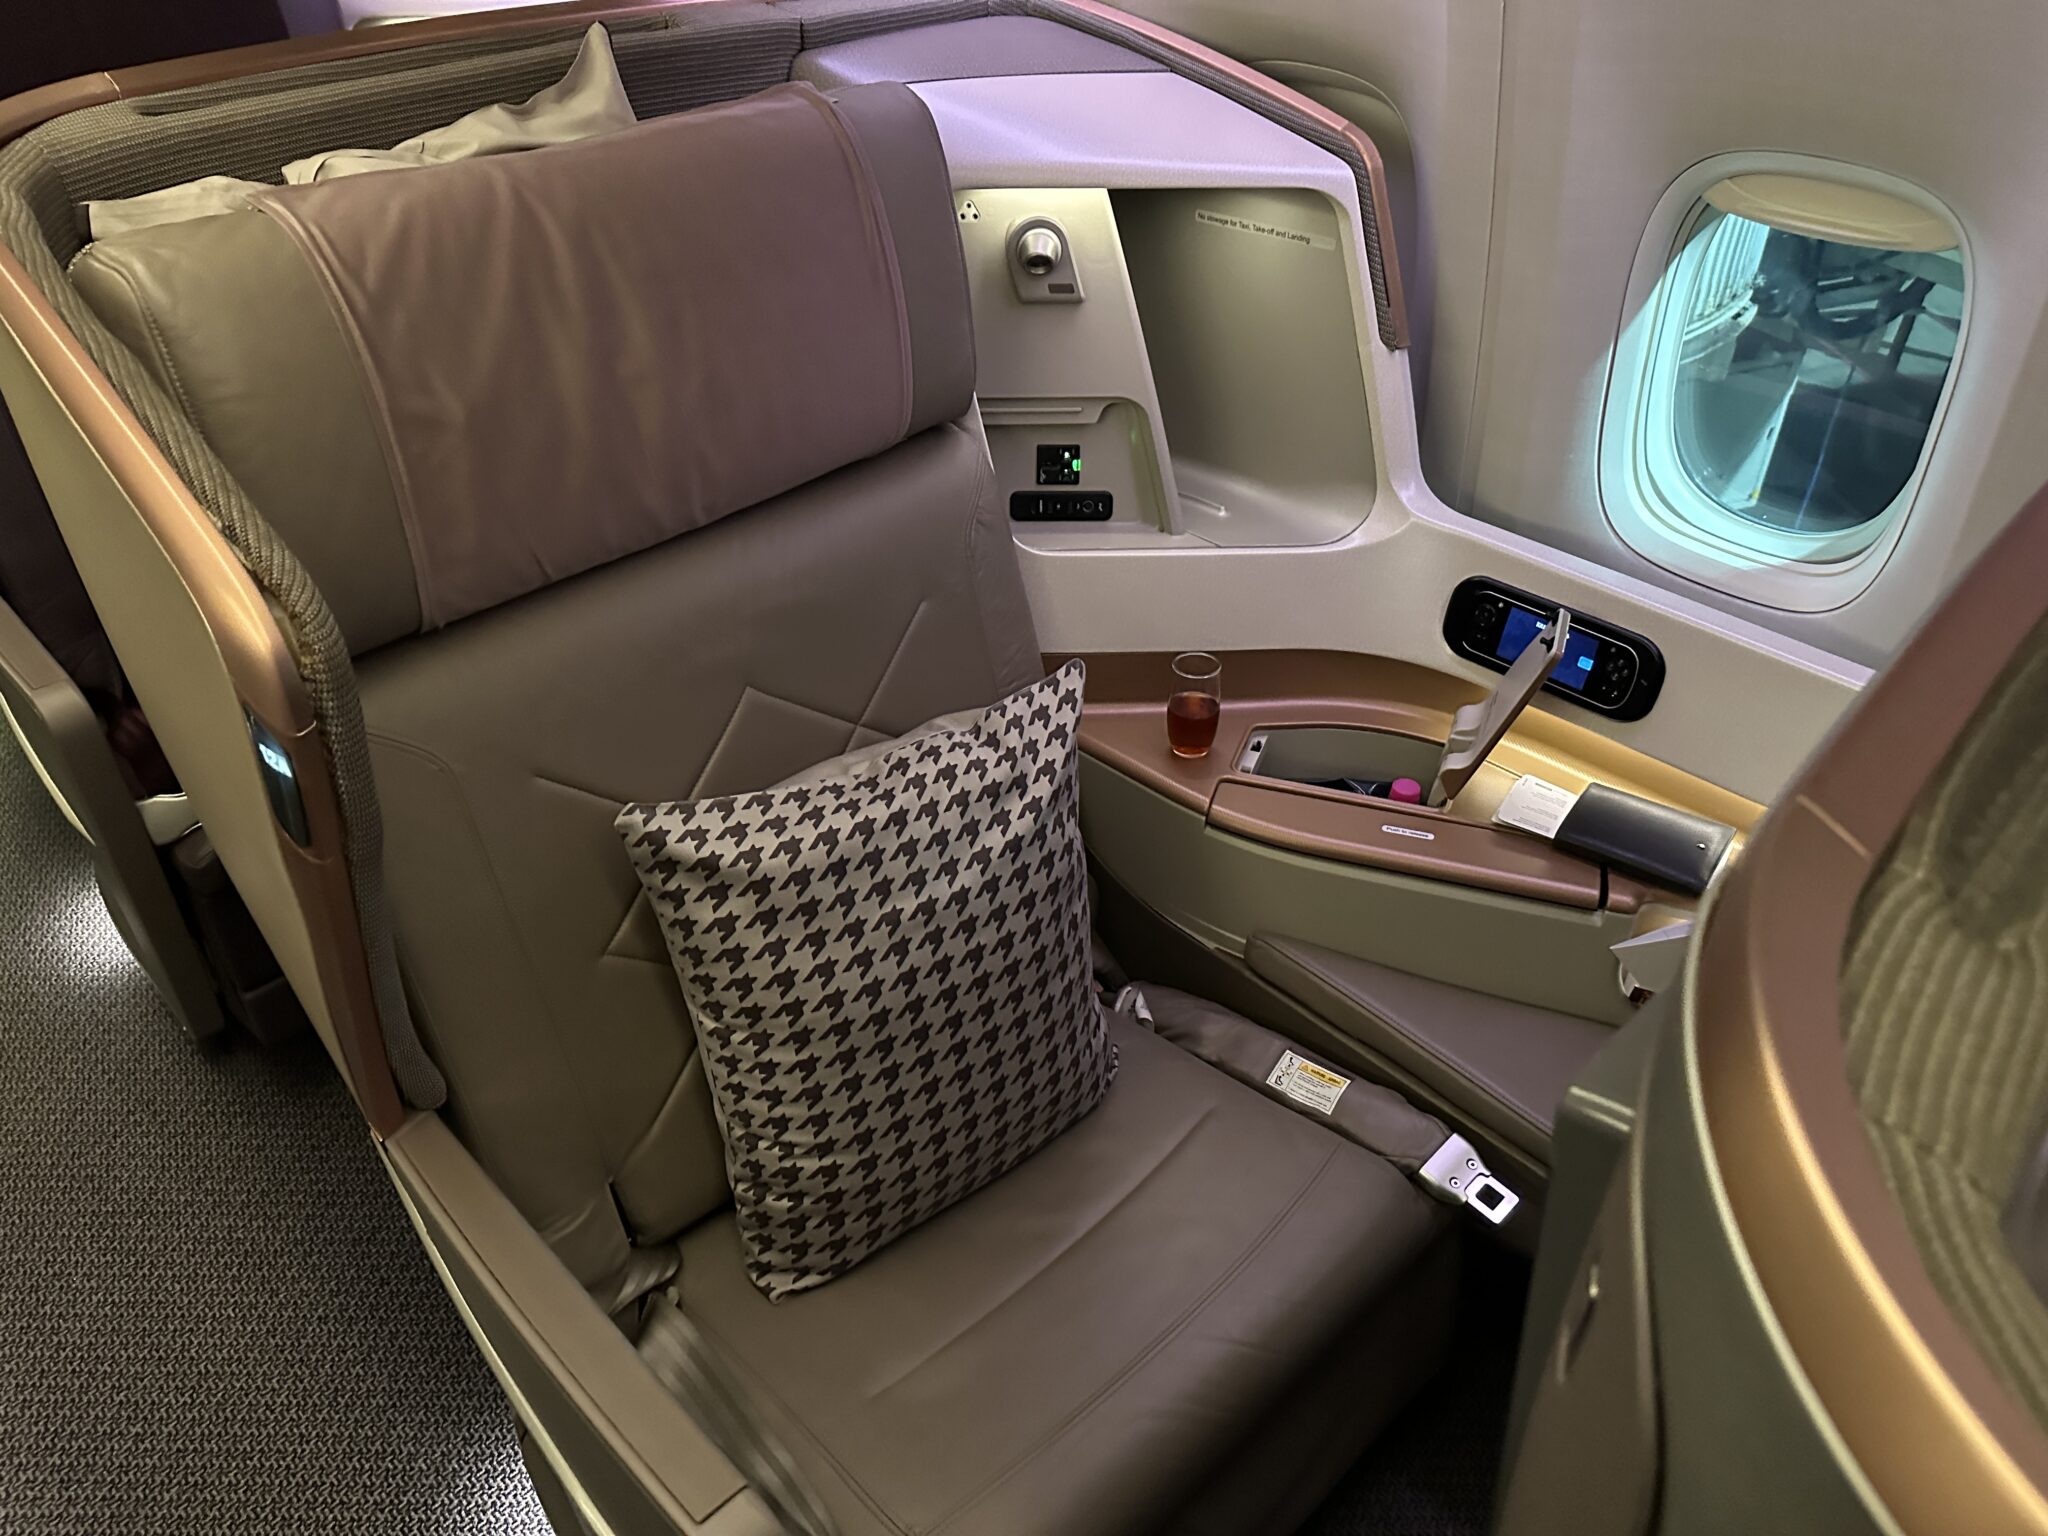 Singapore Airlines Boeing 777-300ER Business Class Review: New